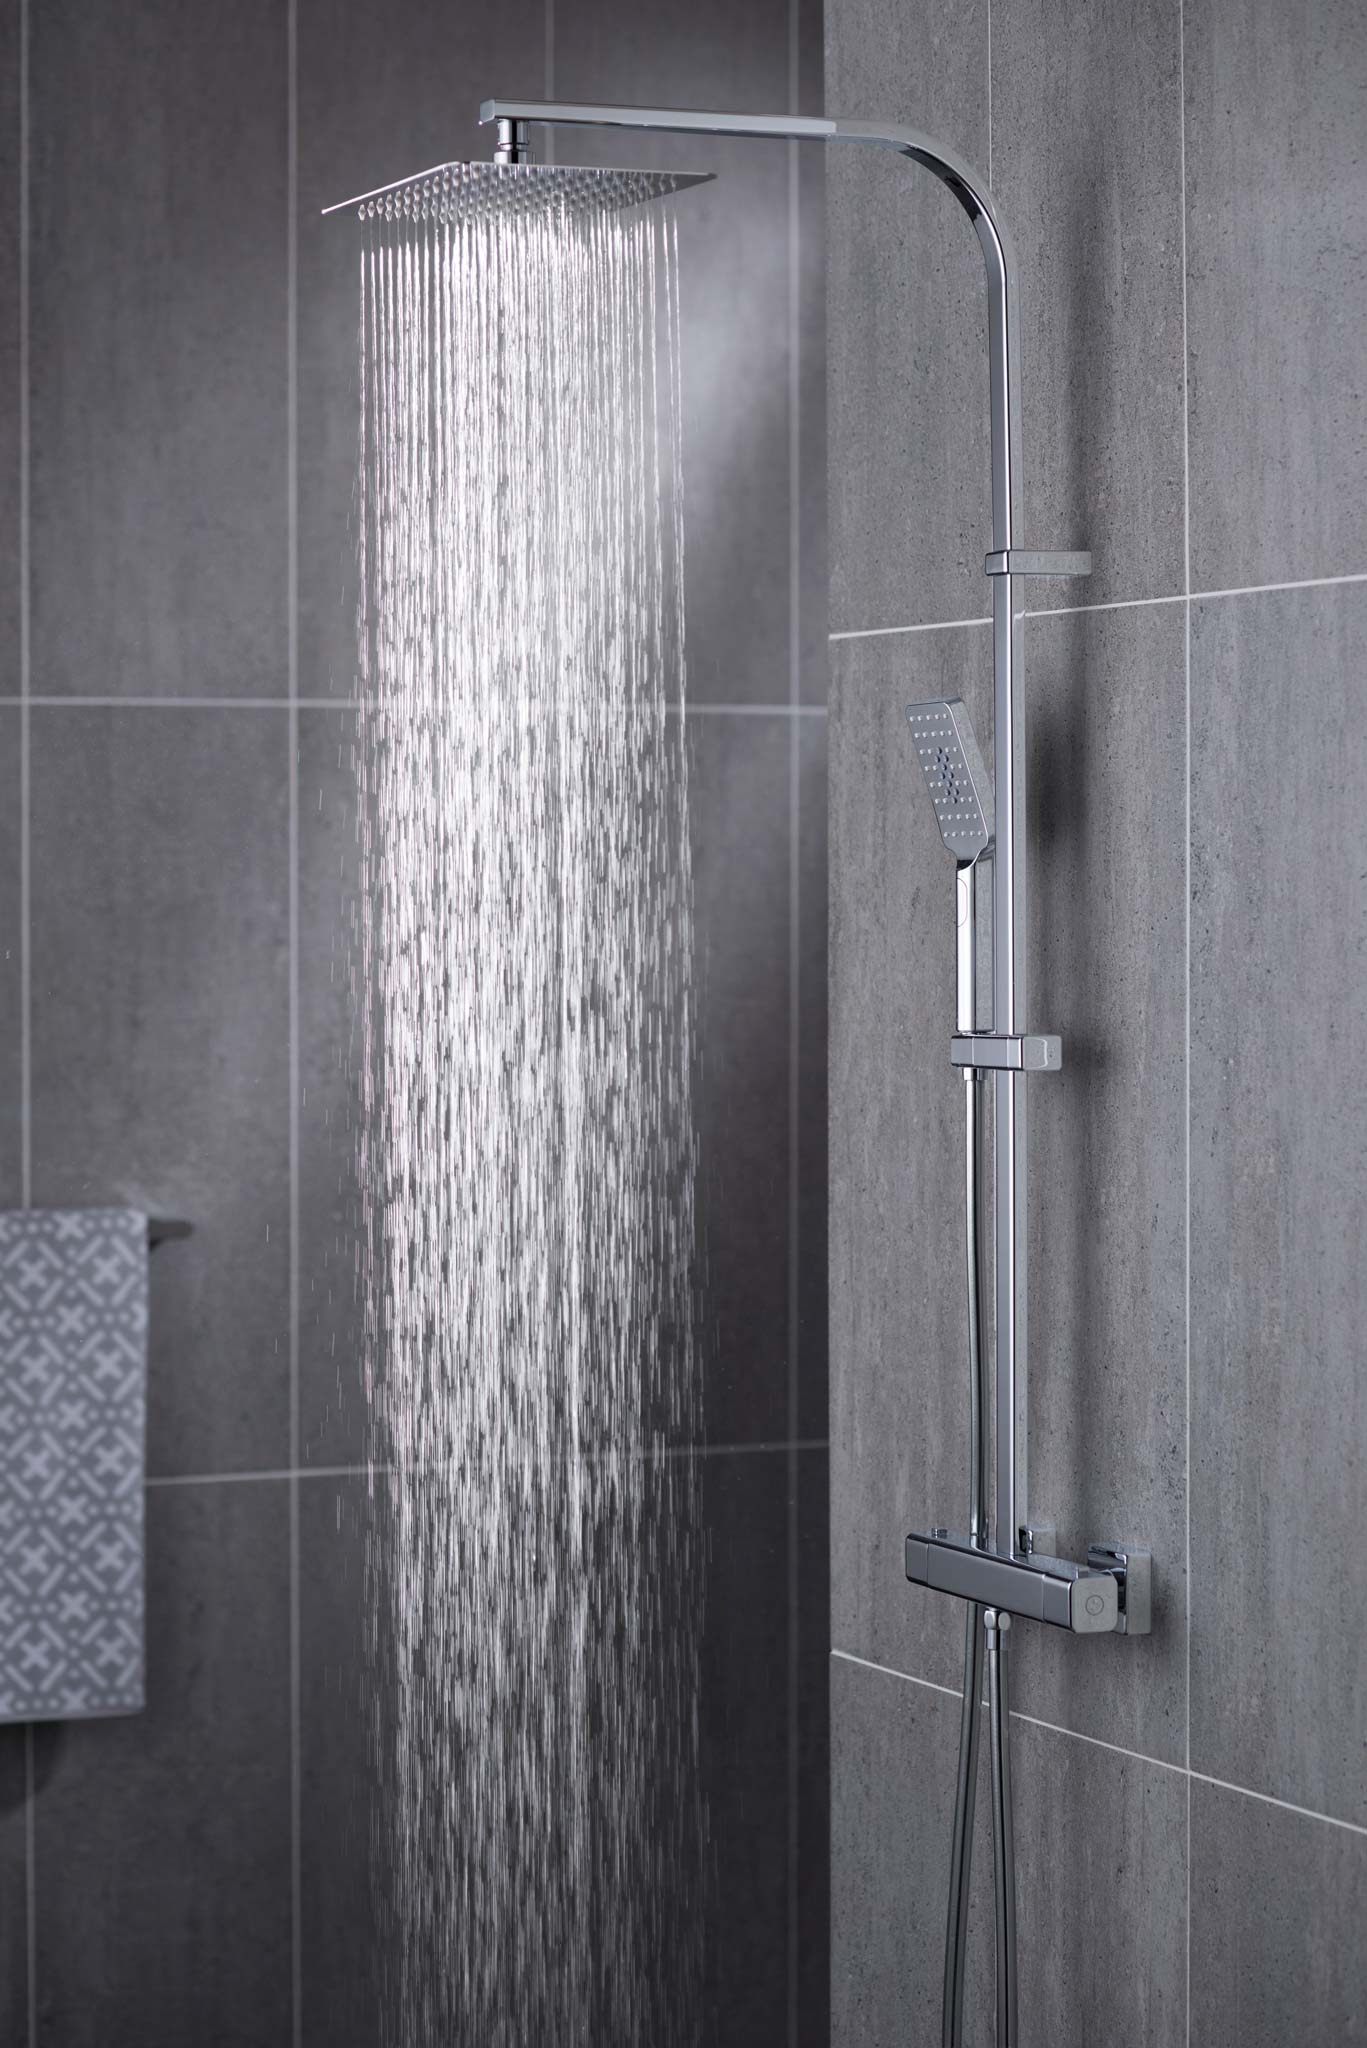 Modern rectangular rigid riser in a grey tiled room with water cascading out of the shower head a towel in the background